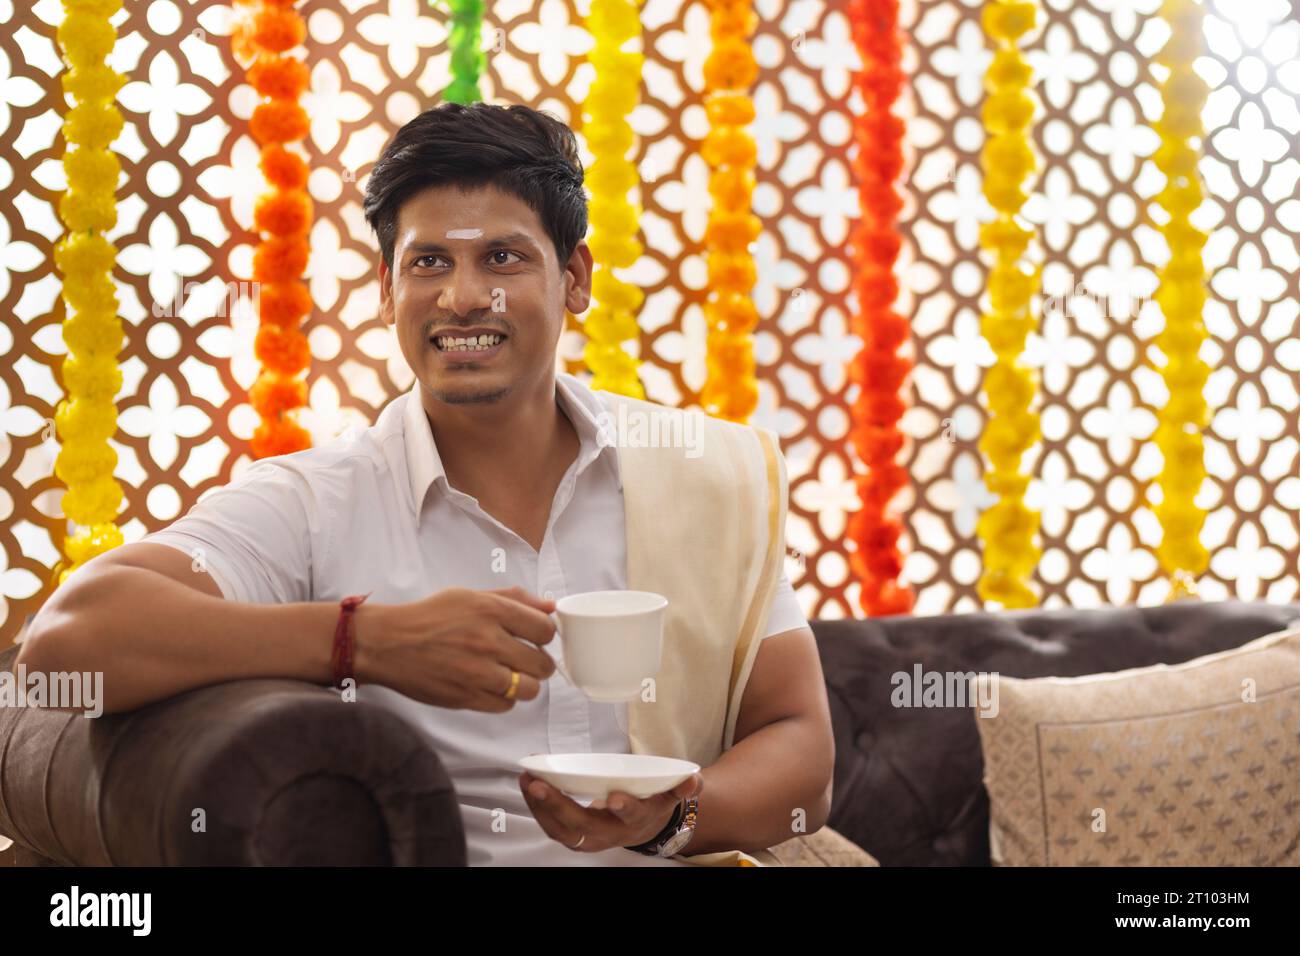 South Indian man drinking tea while sitting on sofa in living room Stock Photo